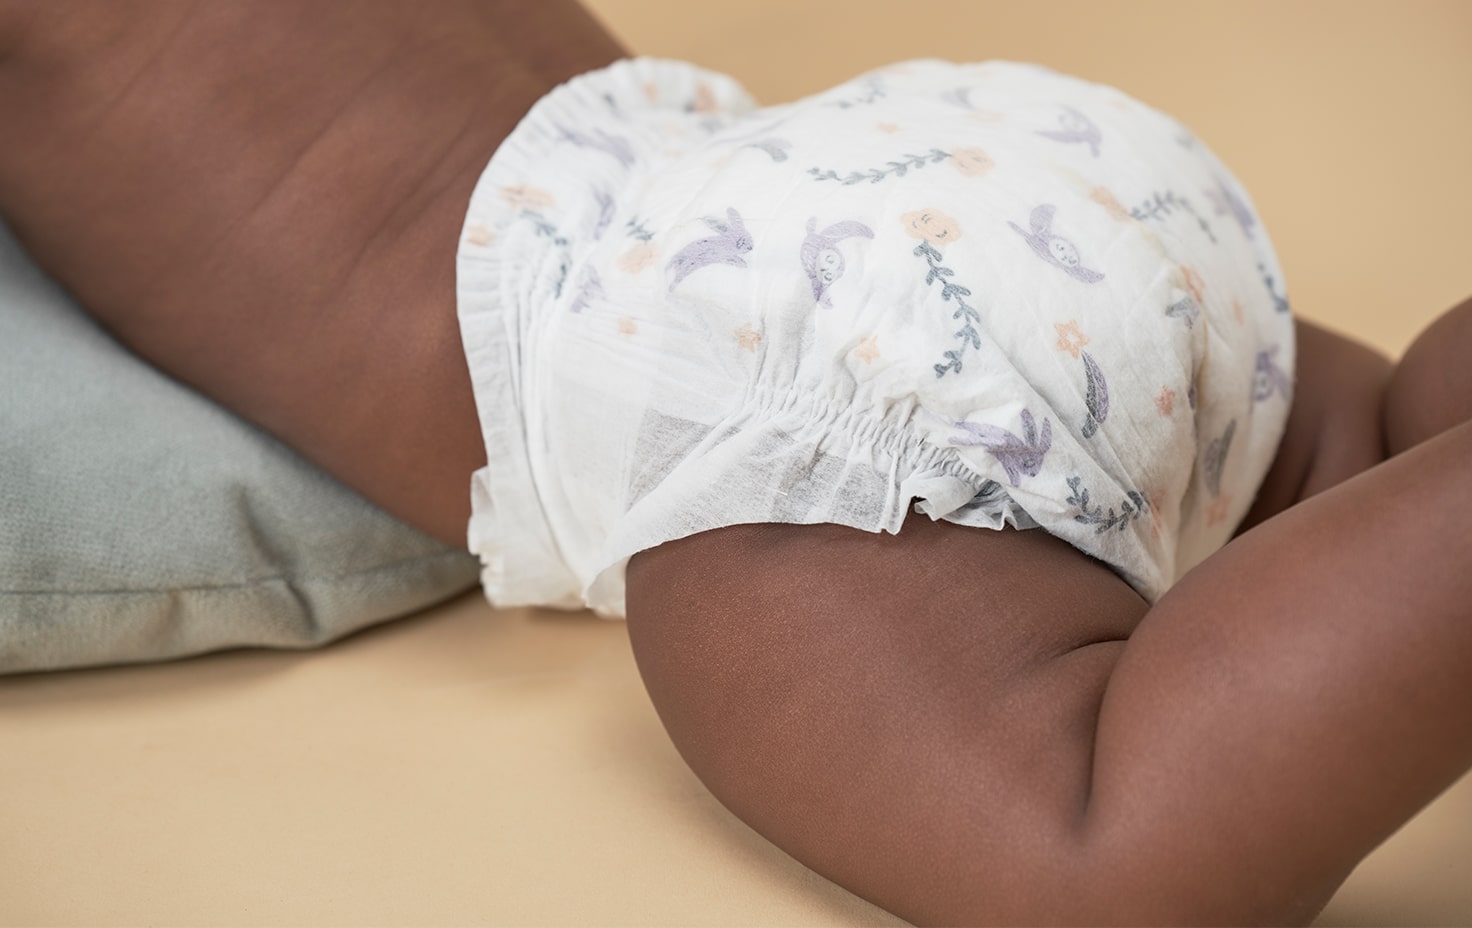 Luxury Diapers, Training Pants & Sensitive Baby Wipes